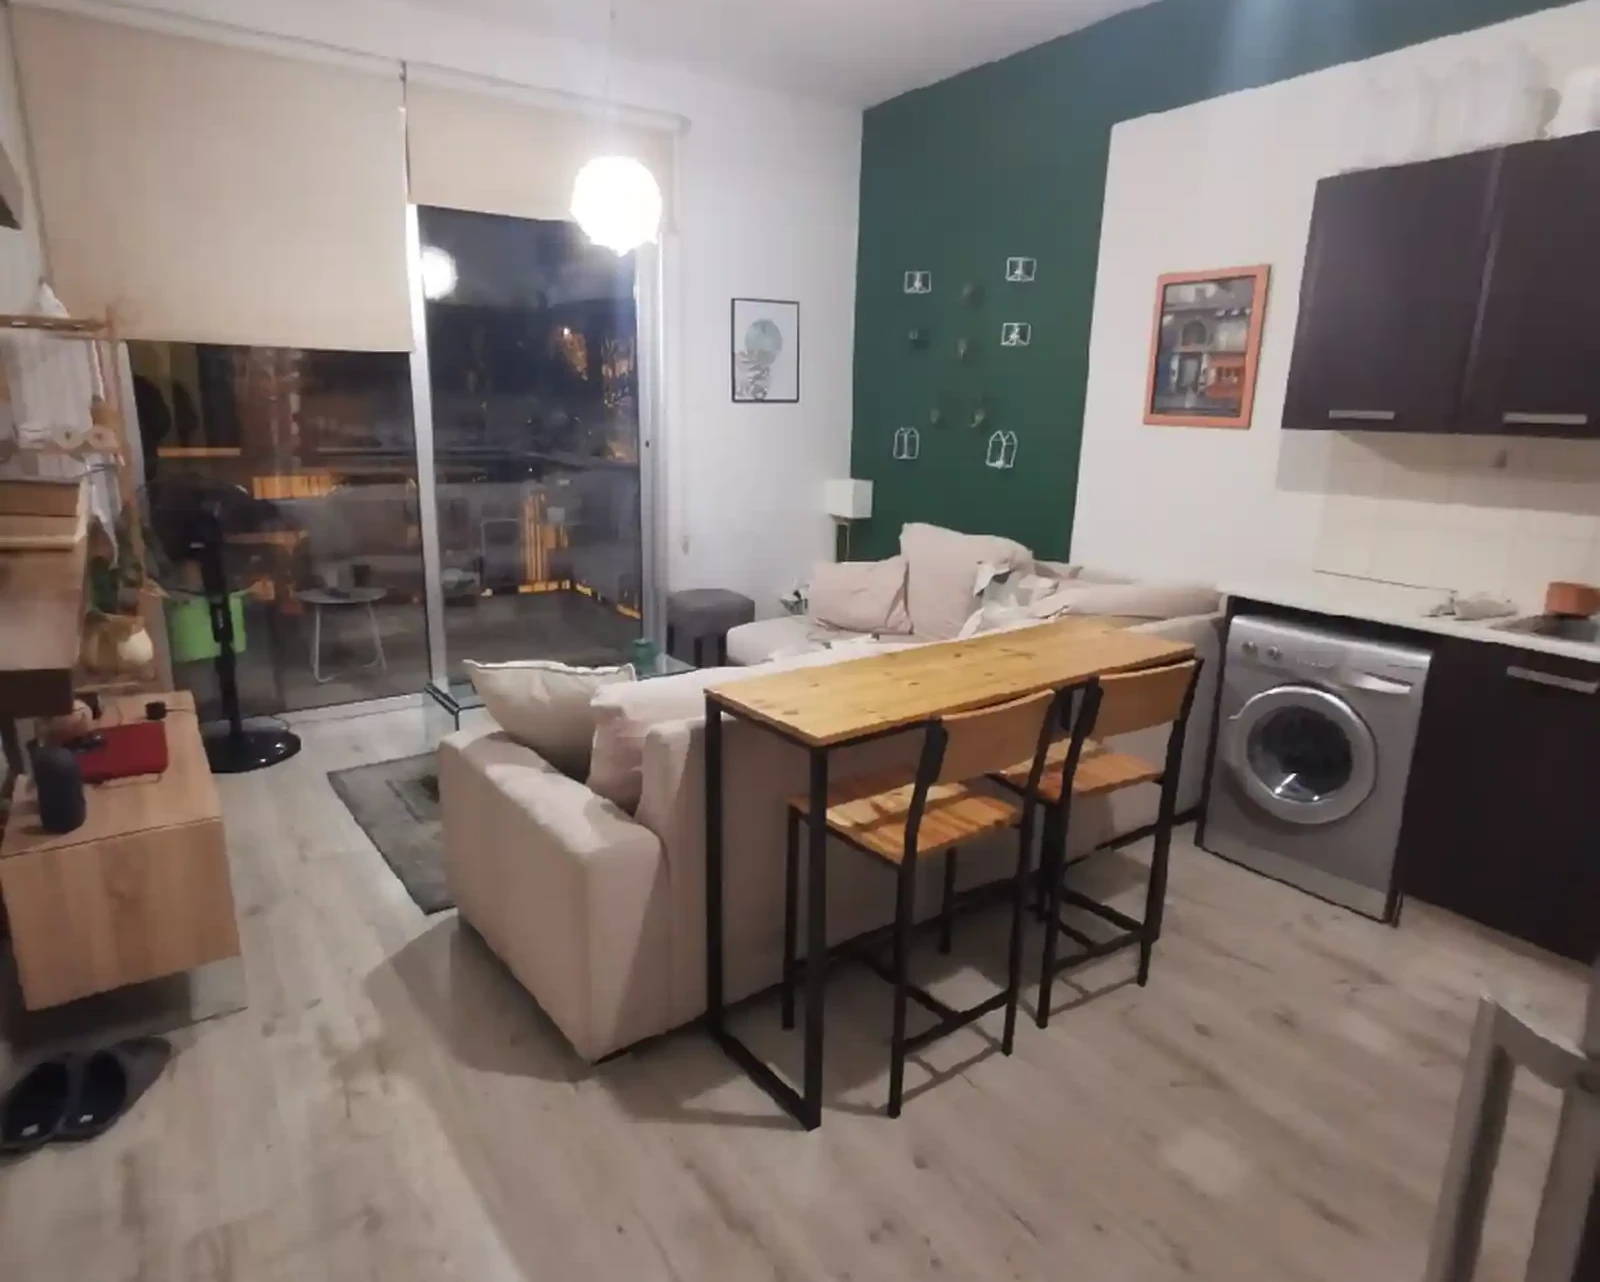 1-bedroom apartment fоr sаle €125.000, image 1